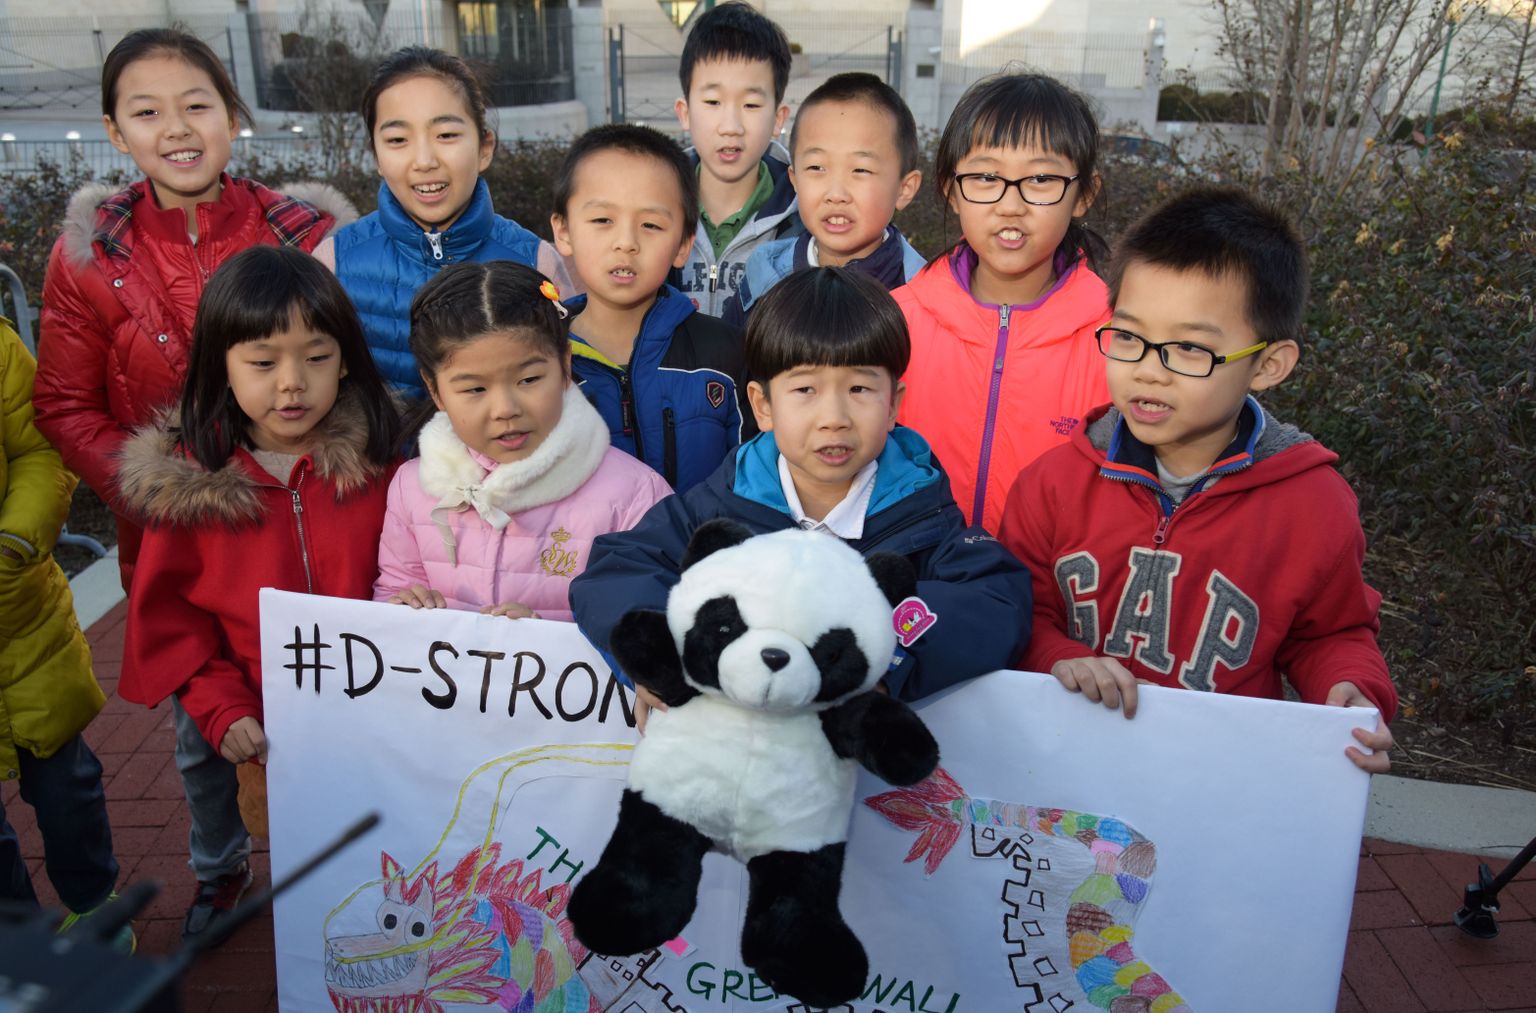 (160114) -- WASHINGTON D.C., Jan. 14, 2016 (Xinhua) -- Children of Chinese diplomats send their best wishes to Dorian Murray, an American boy suffering from cancer, at Chinese Embassy in Washington D.C., capital of the United States, Jan. 14, 2016. (Xinhua/Bao Dandan) (Photo by Xinhua/Sipa USA)